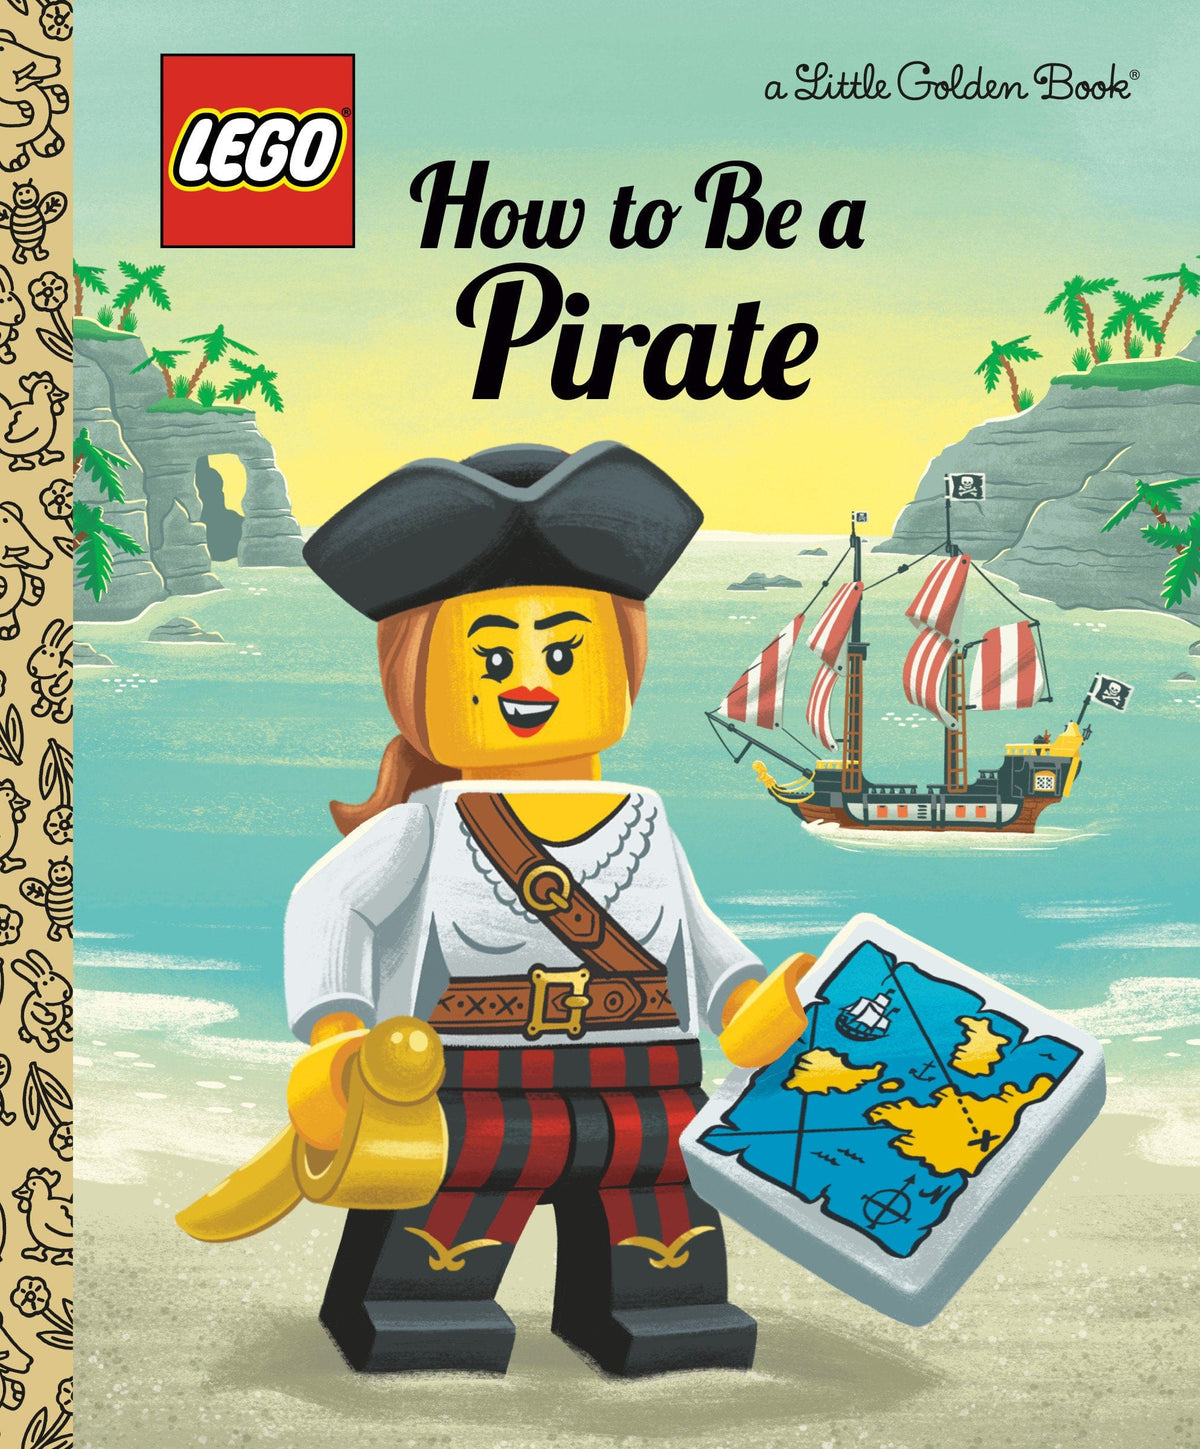 Little Golden Book: Lego - How To Be A Pirate - Third Eye